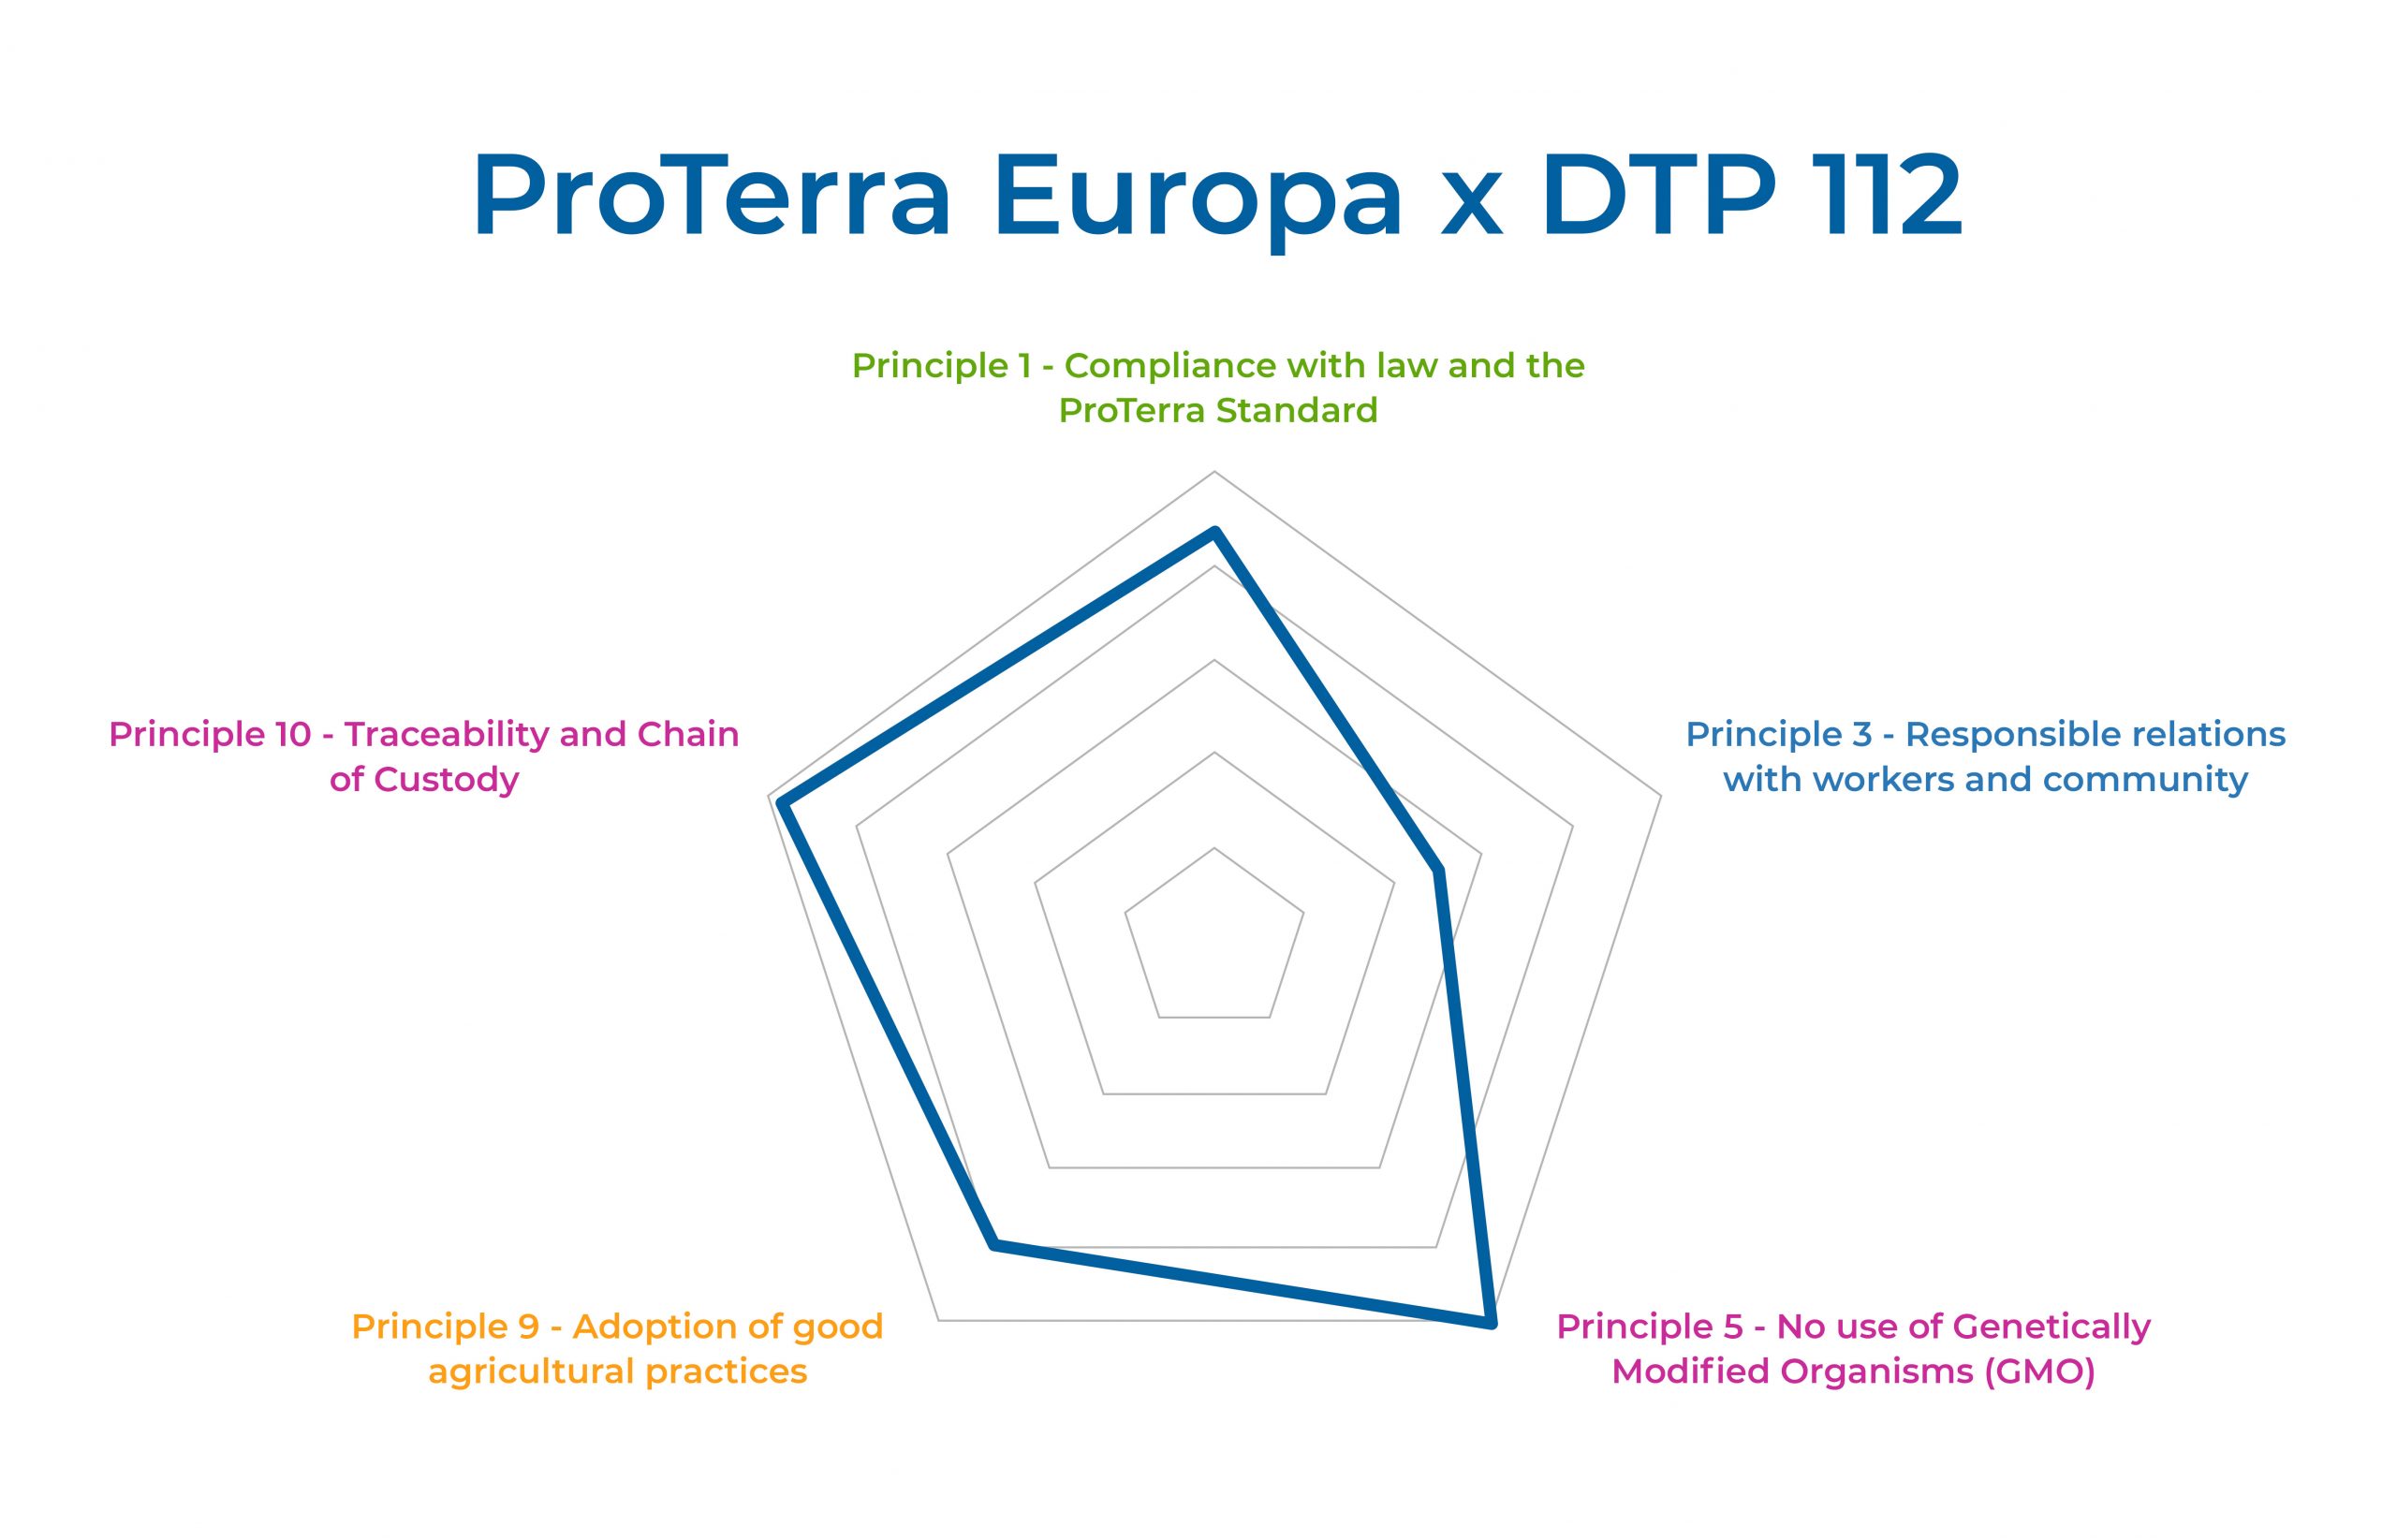 BENCHMARK SUSTAINABLE CEREAL AND OILSEED - DTP112 Ver 5 (09.01.2020) and ProTerra V4.1 + ProTerra Europa